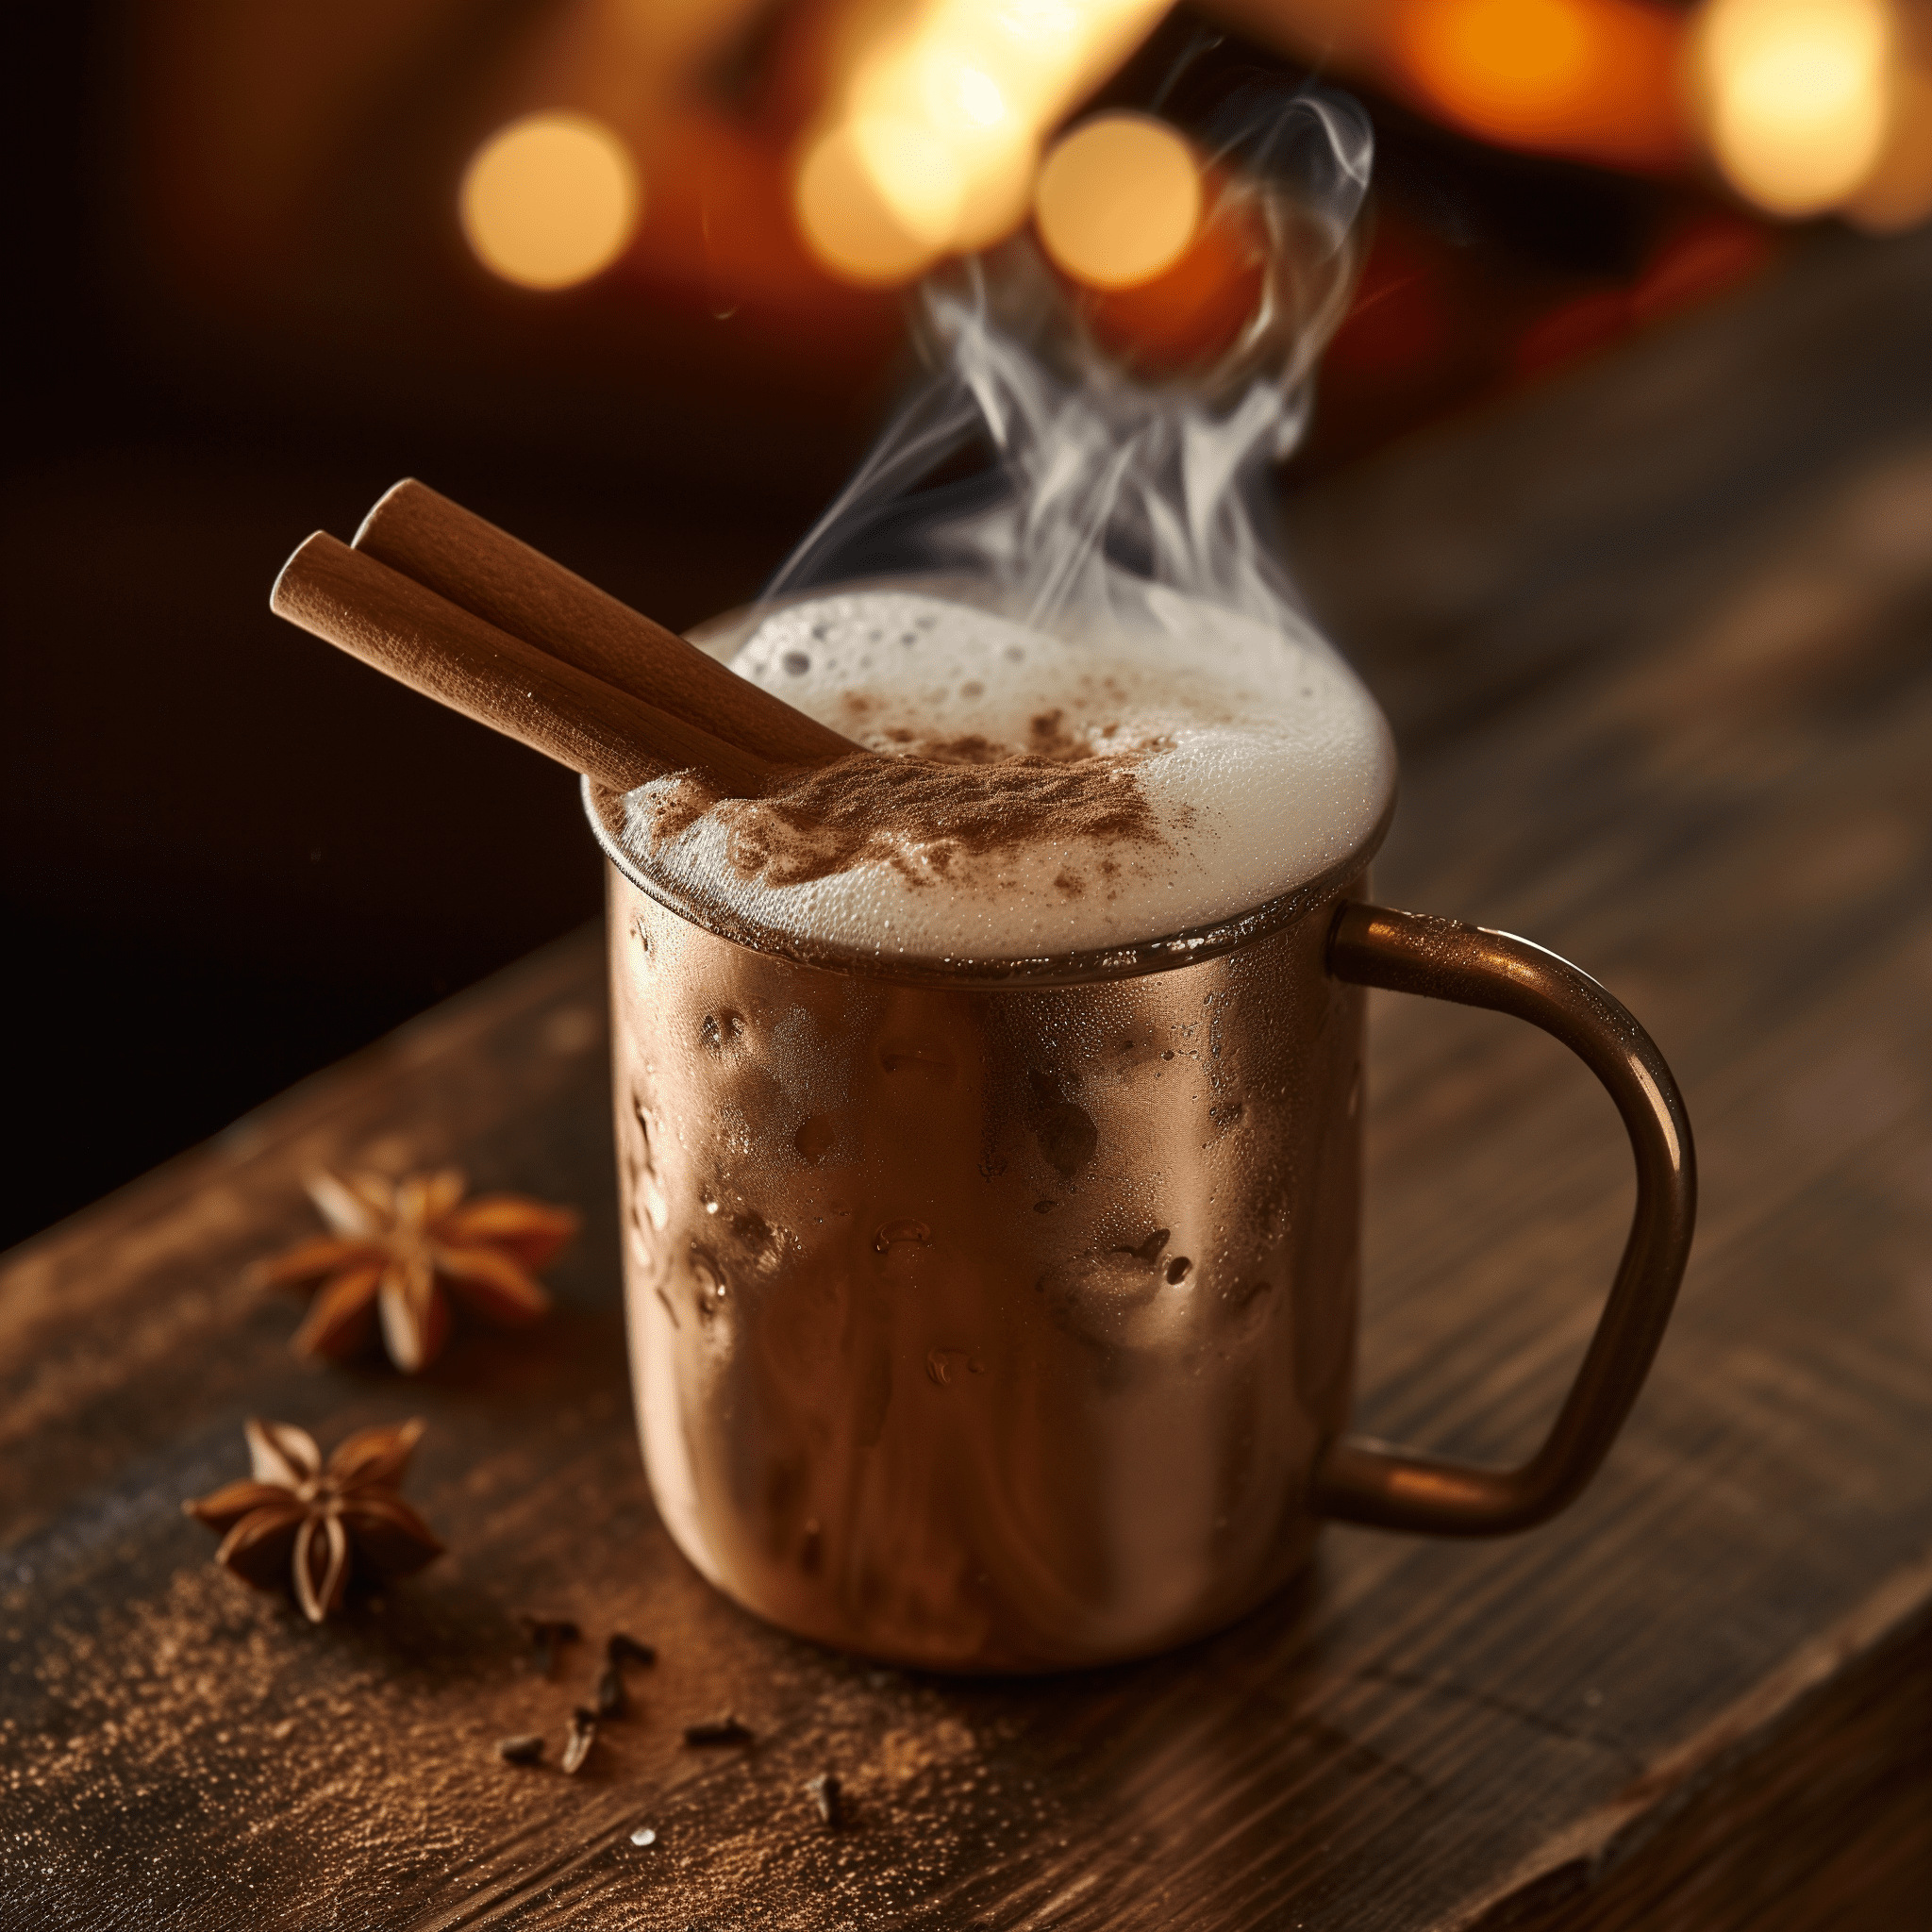 The Chai Moscow Mule offers a complex flavor profile. It's spicy, slightly sweet, and refreshingly effervescent. The warmth of the chai spices blends beautifully with the sharpness of the ginger beer, while the vodka provides a smooth, clean base.